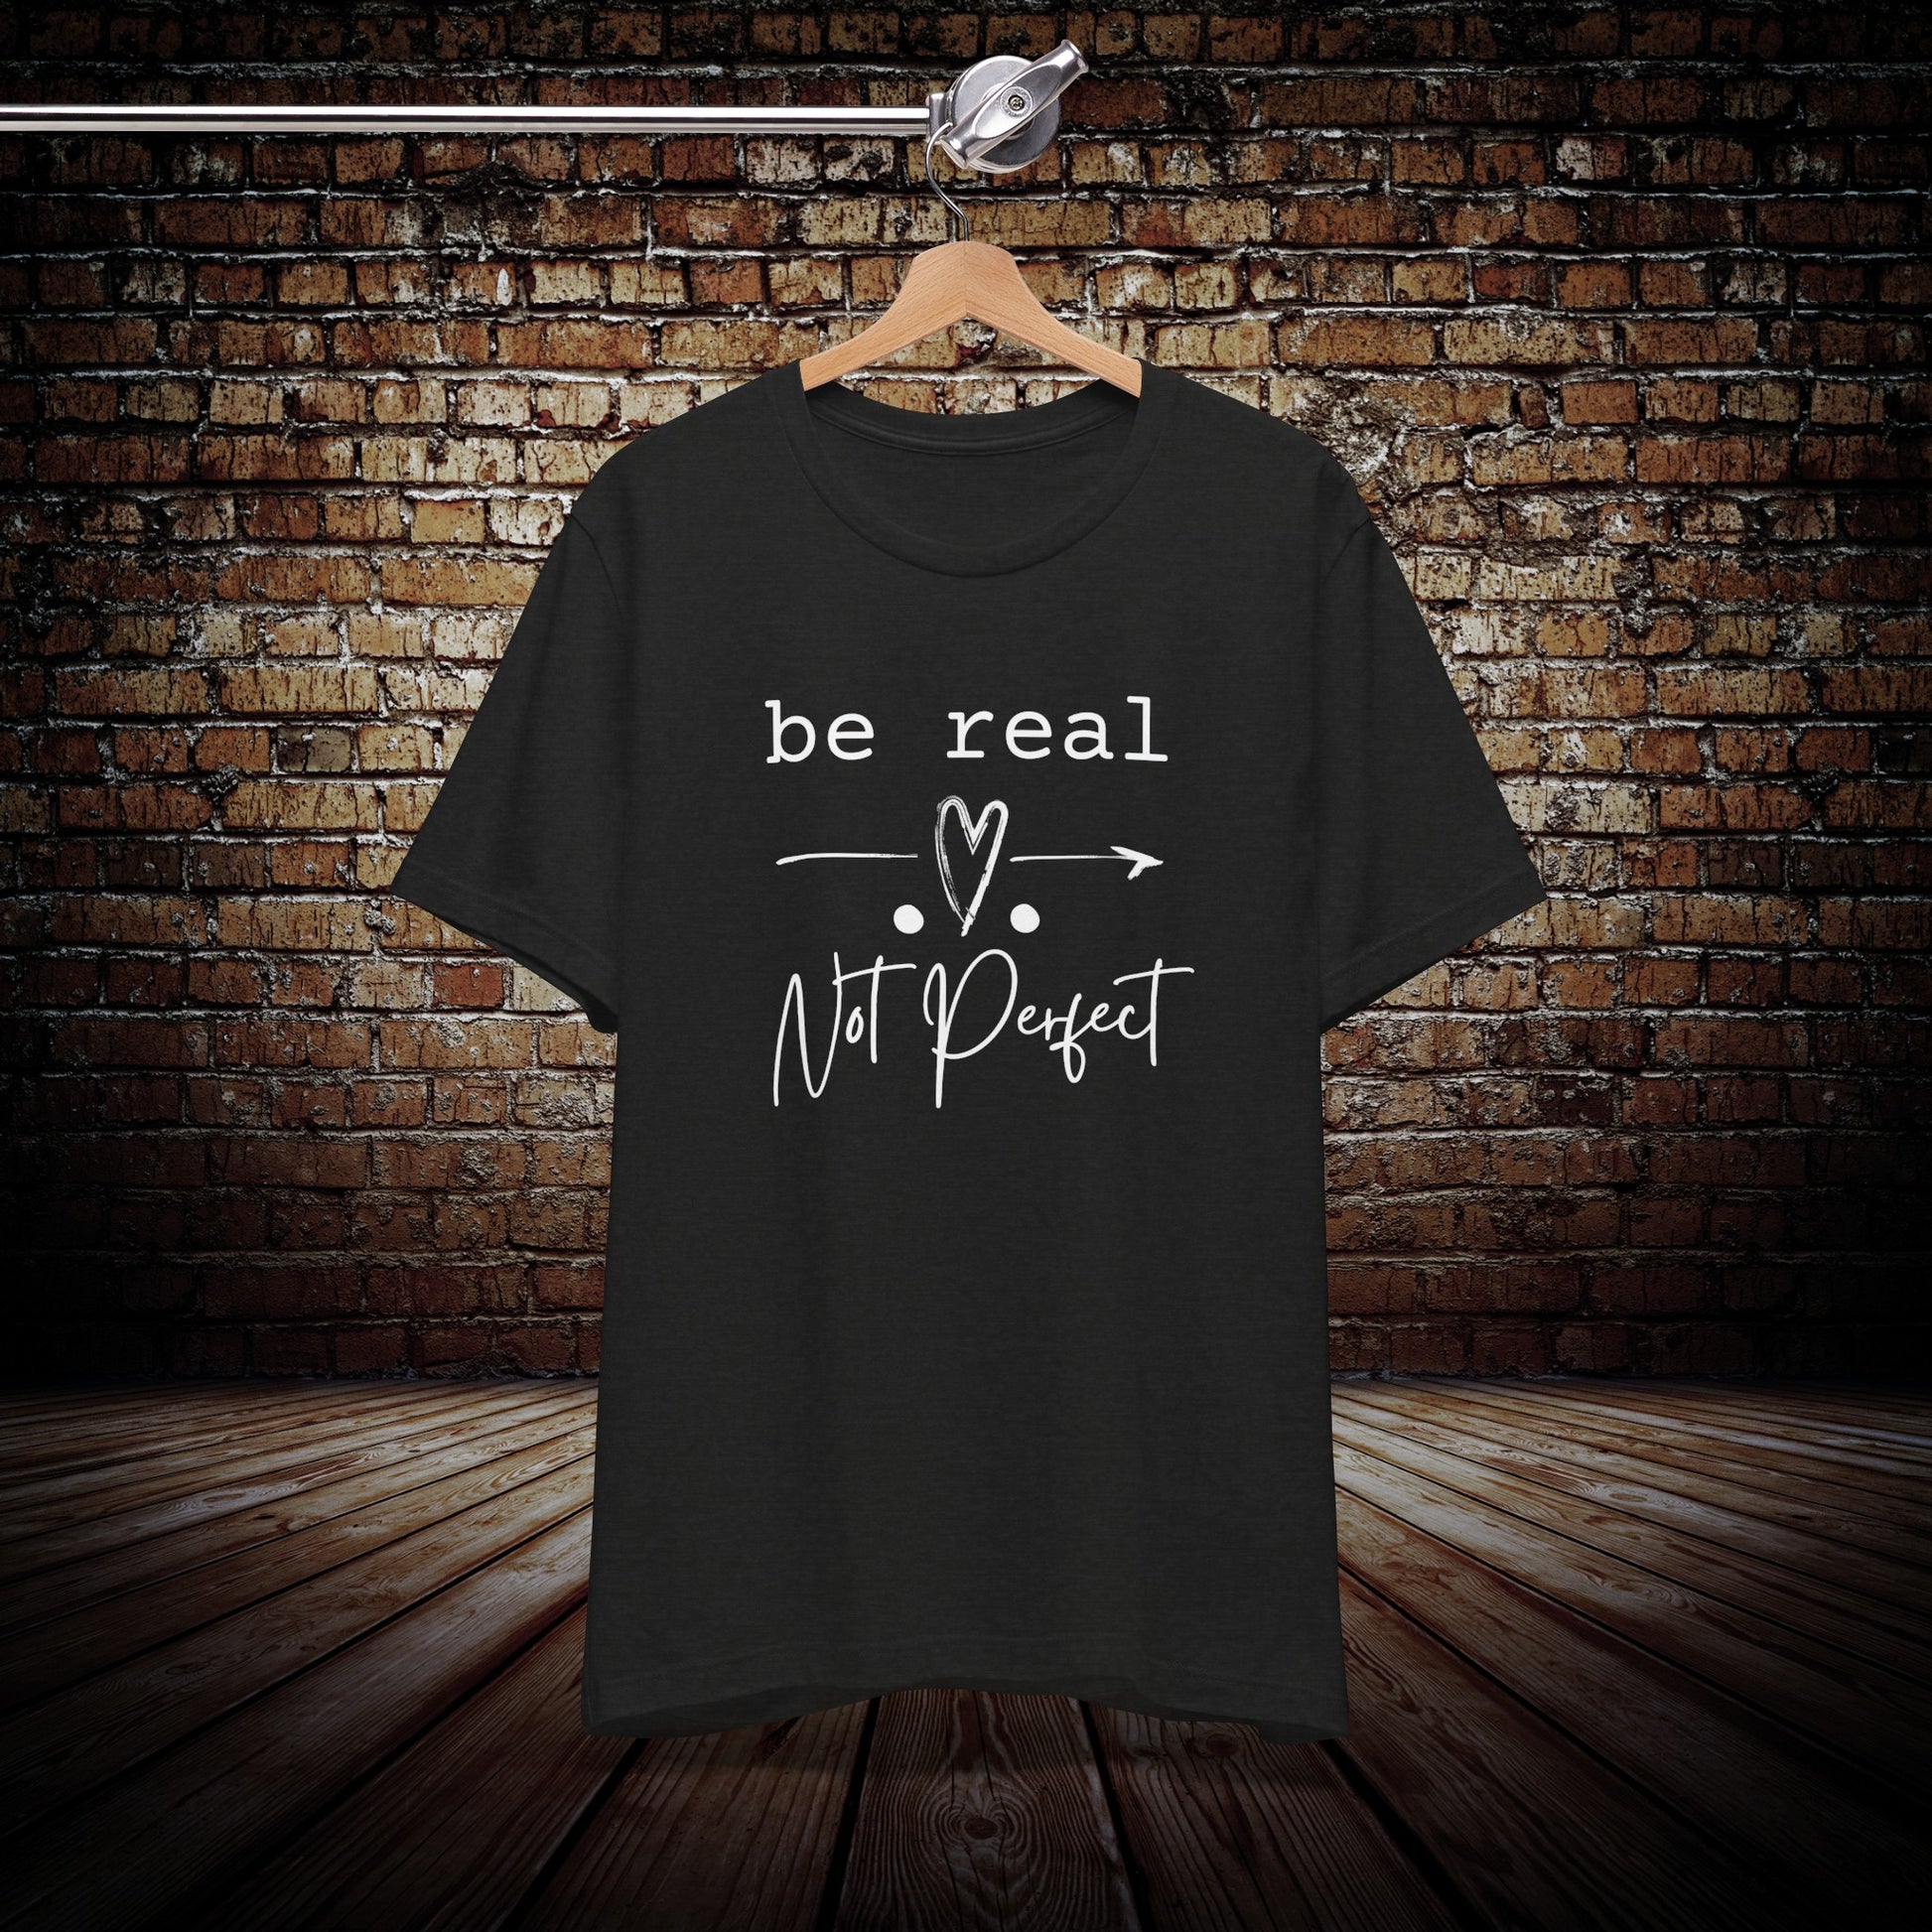 Be real not perfect motivational tee